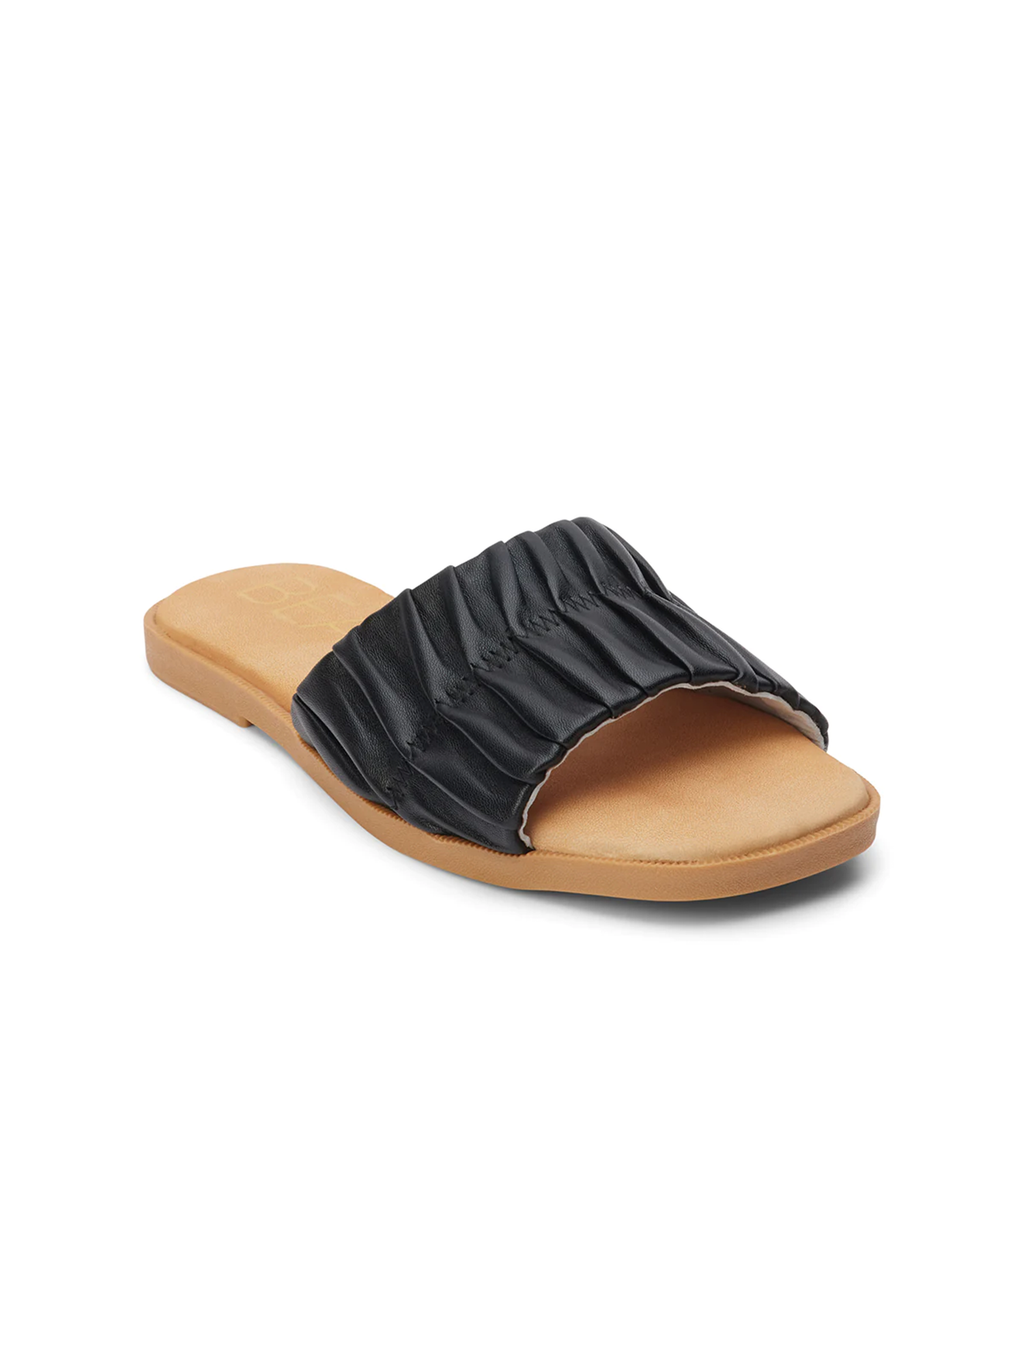 Viva Slide in Black - Stitch And Feather